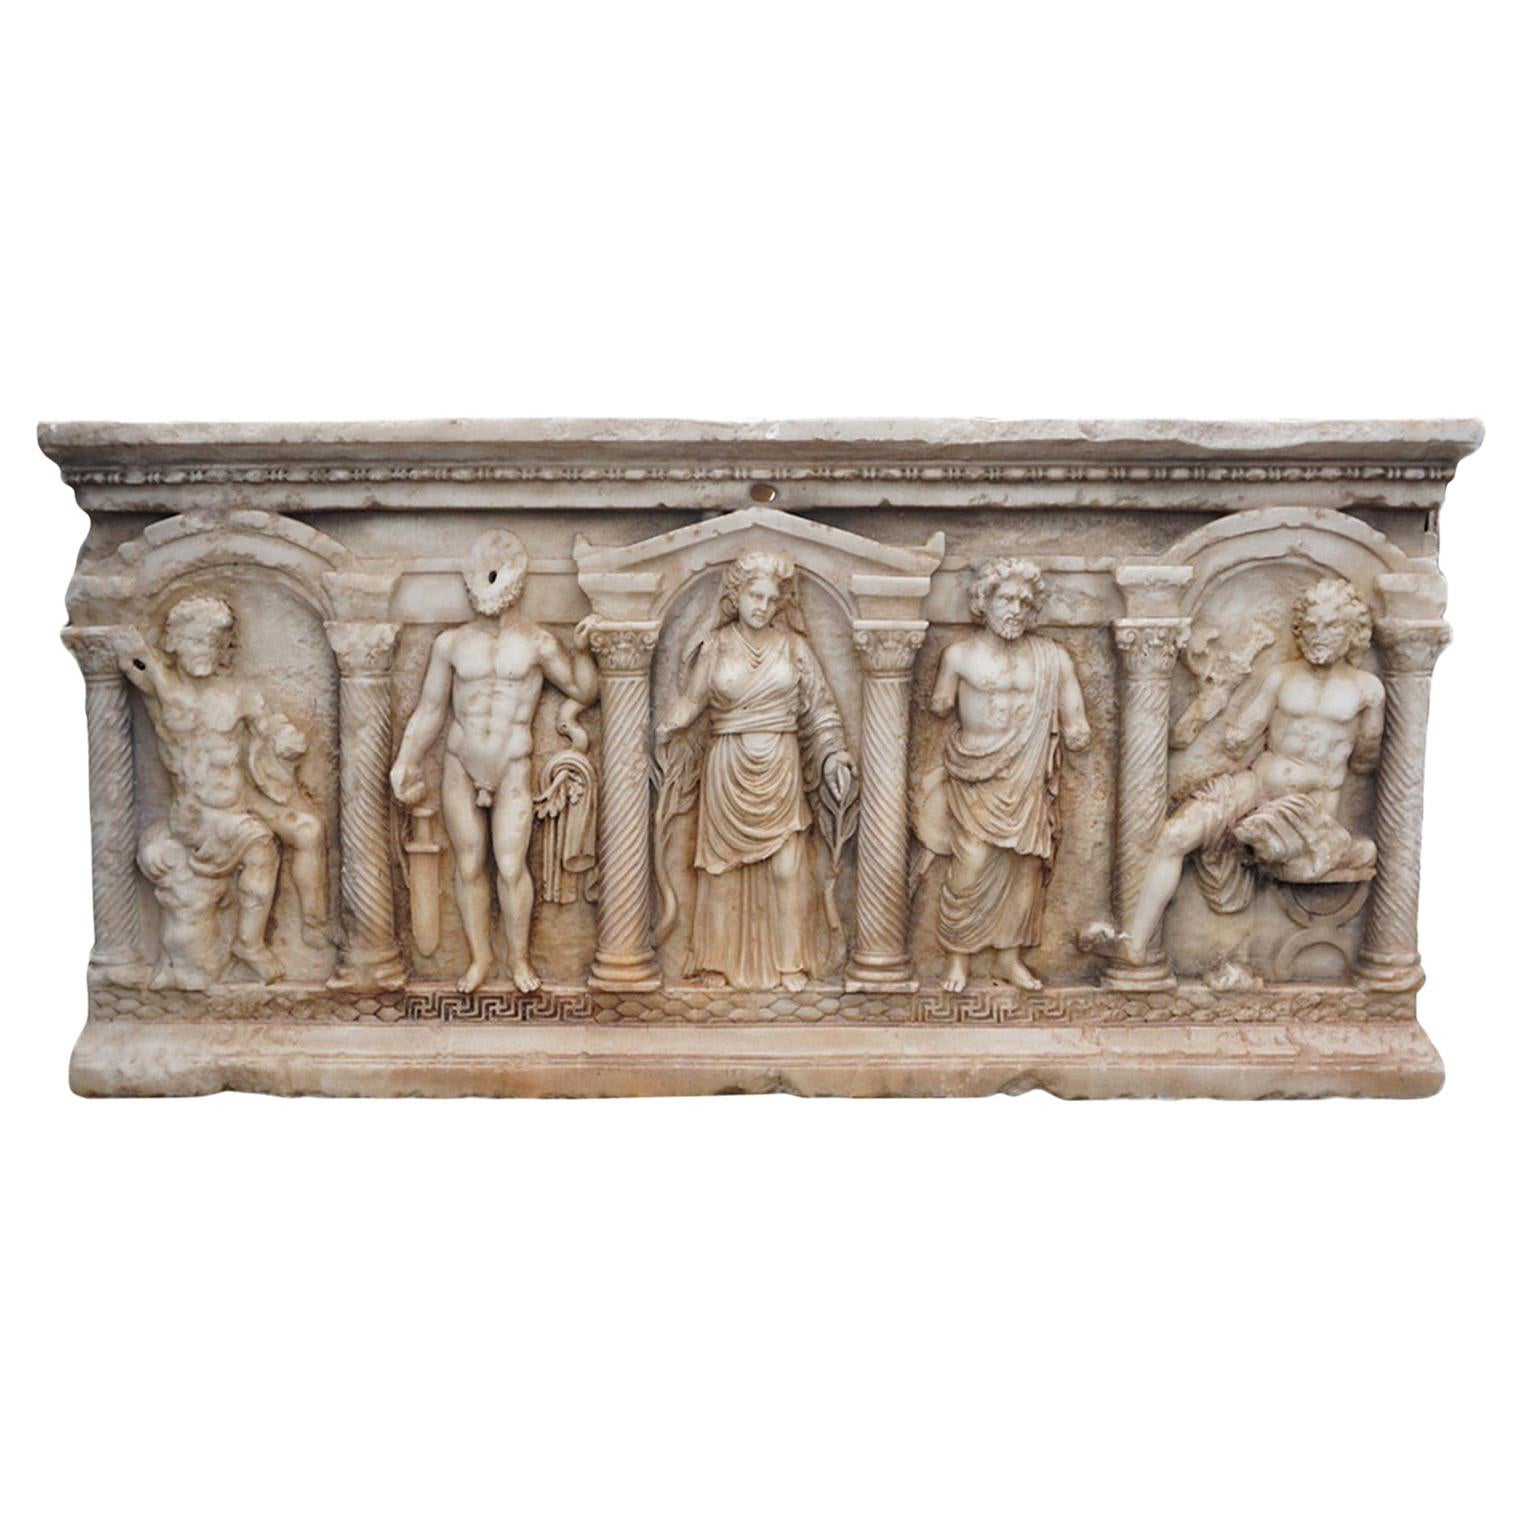 19th Century Antique Sarcophagus, Italian Thassos Marble Coffin or Basin Planter For Sale